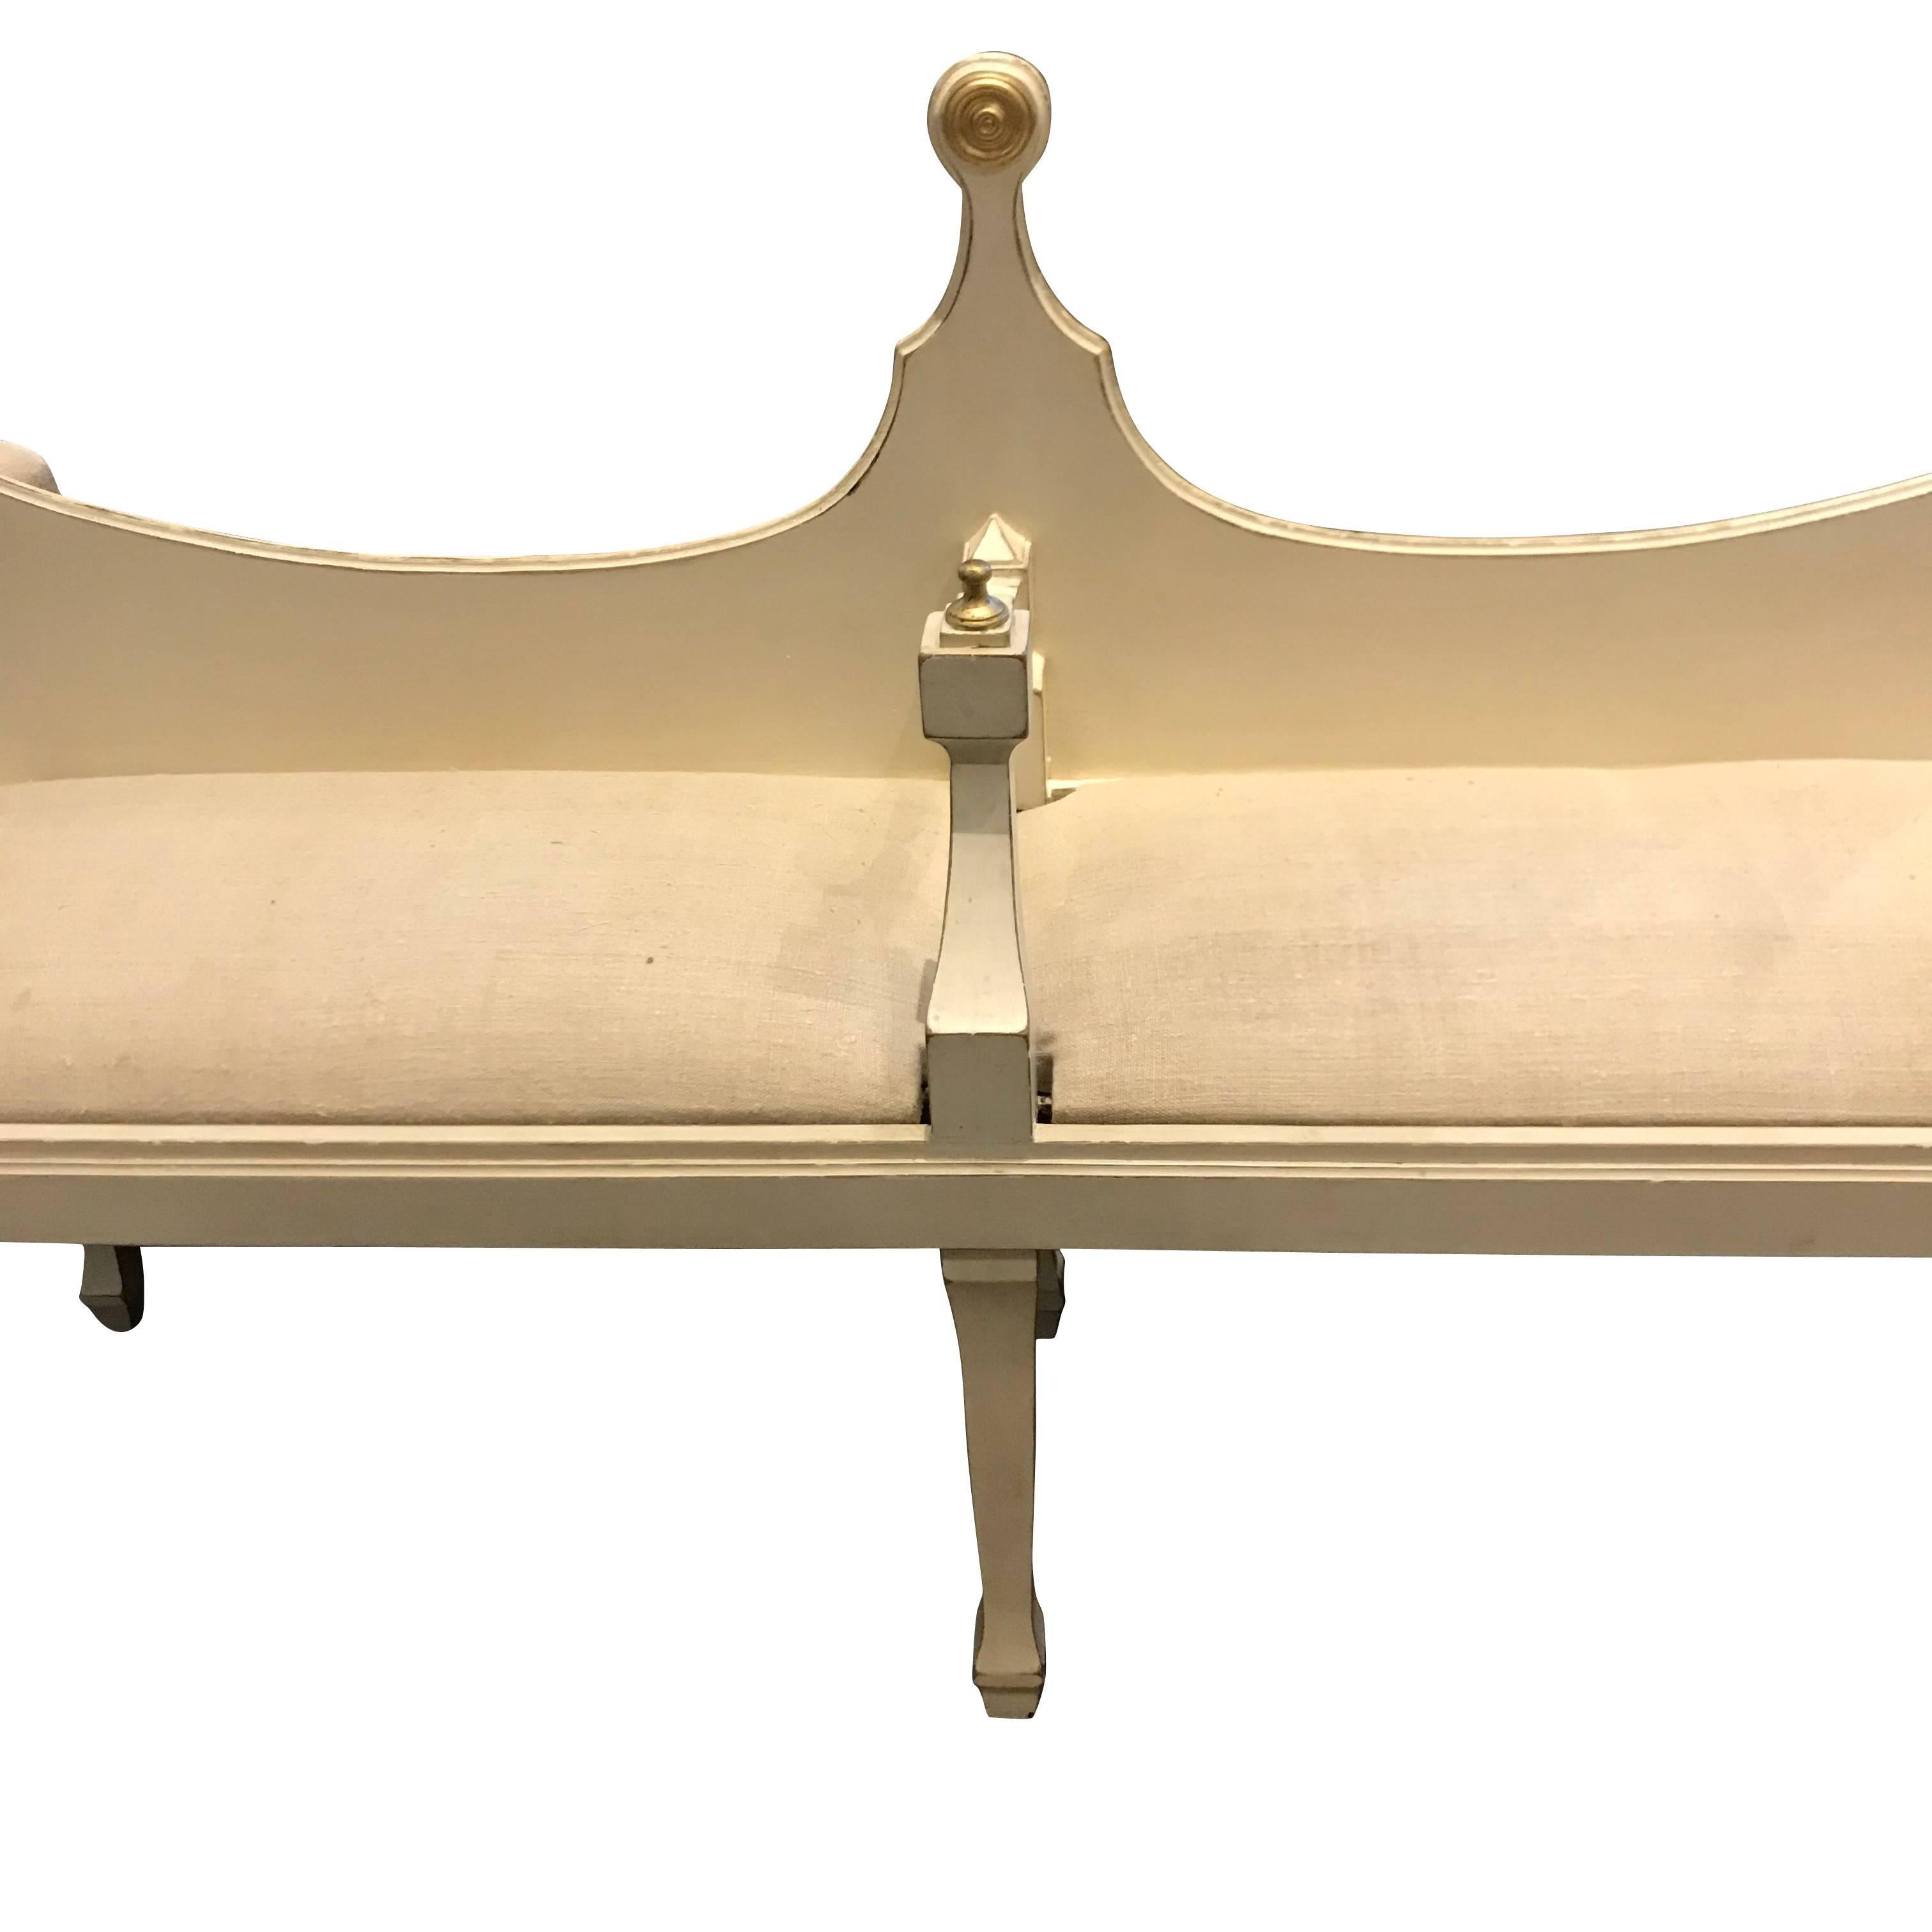 1940s, Italian very decorative Italian two-seat rubbed white wooden bench with gold gilt wooden decorations.
Newly reupholstered in vintage Belgian linen.